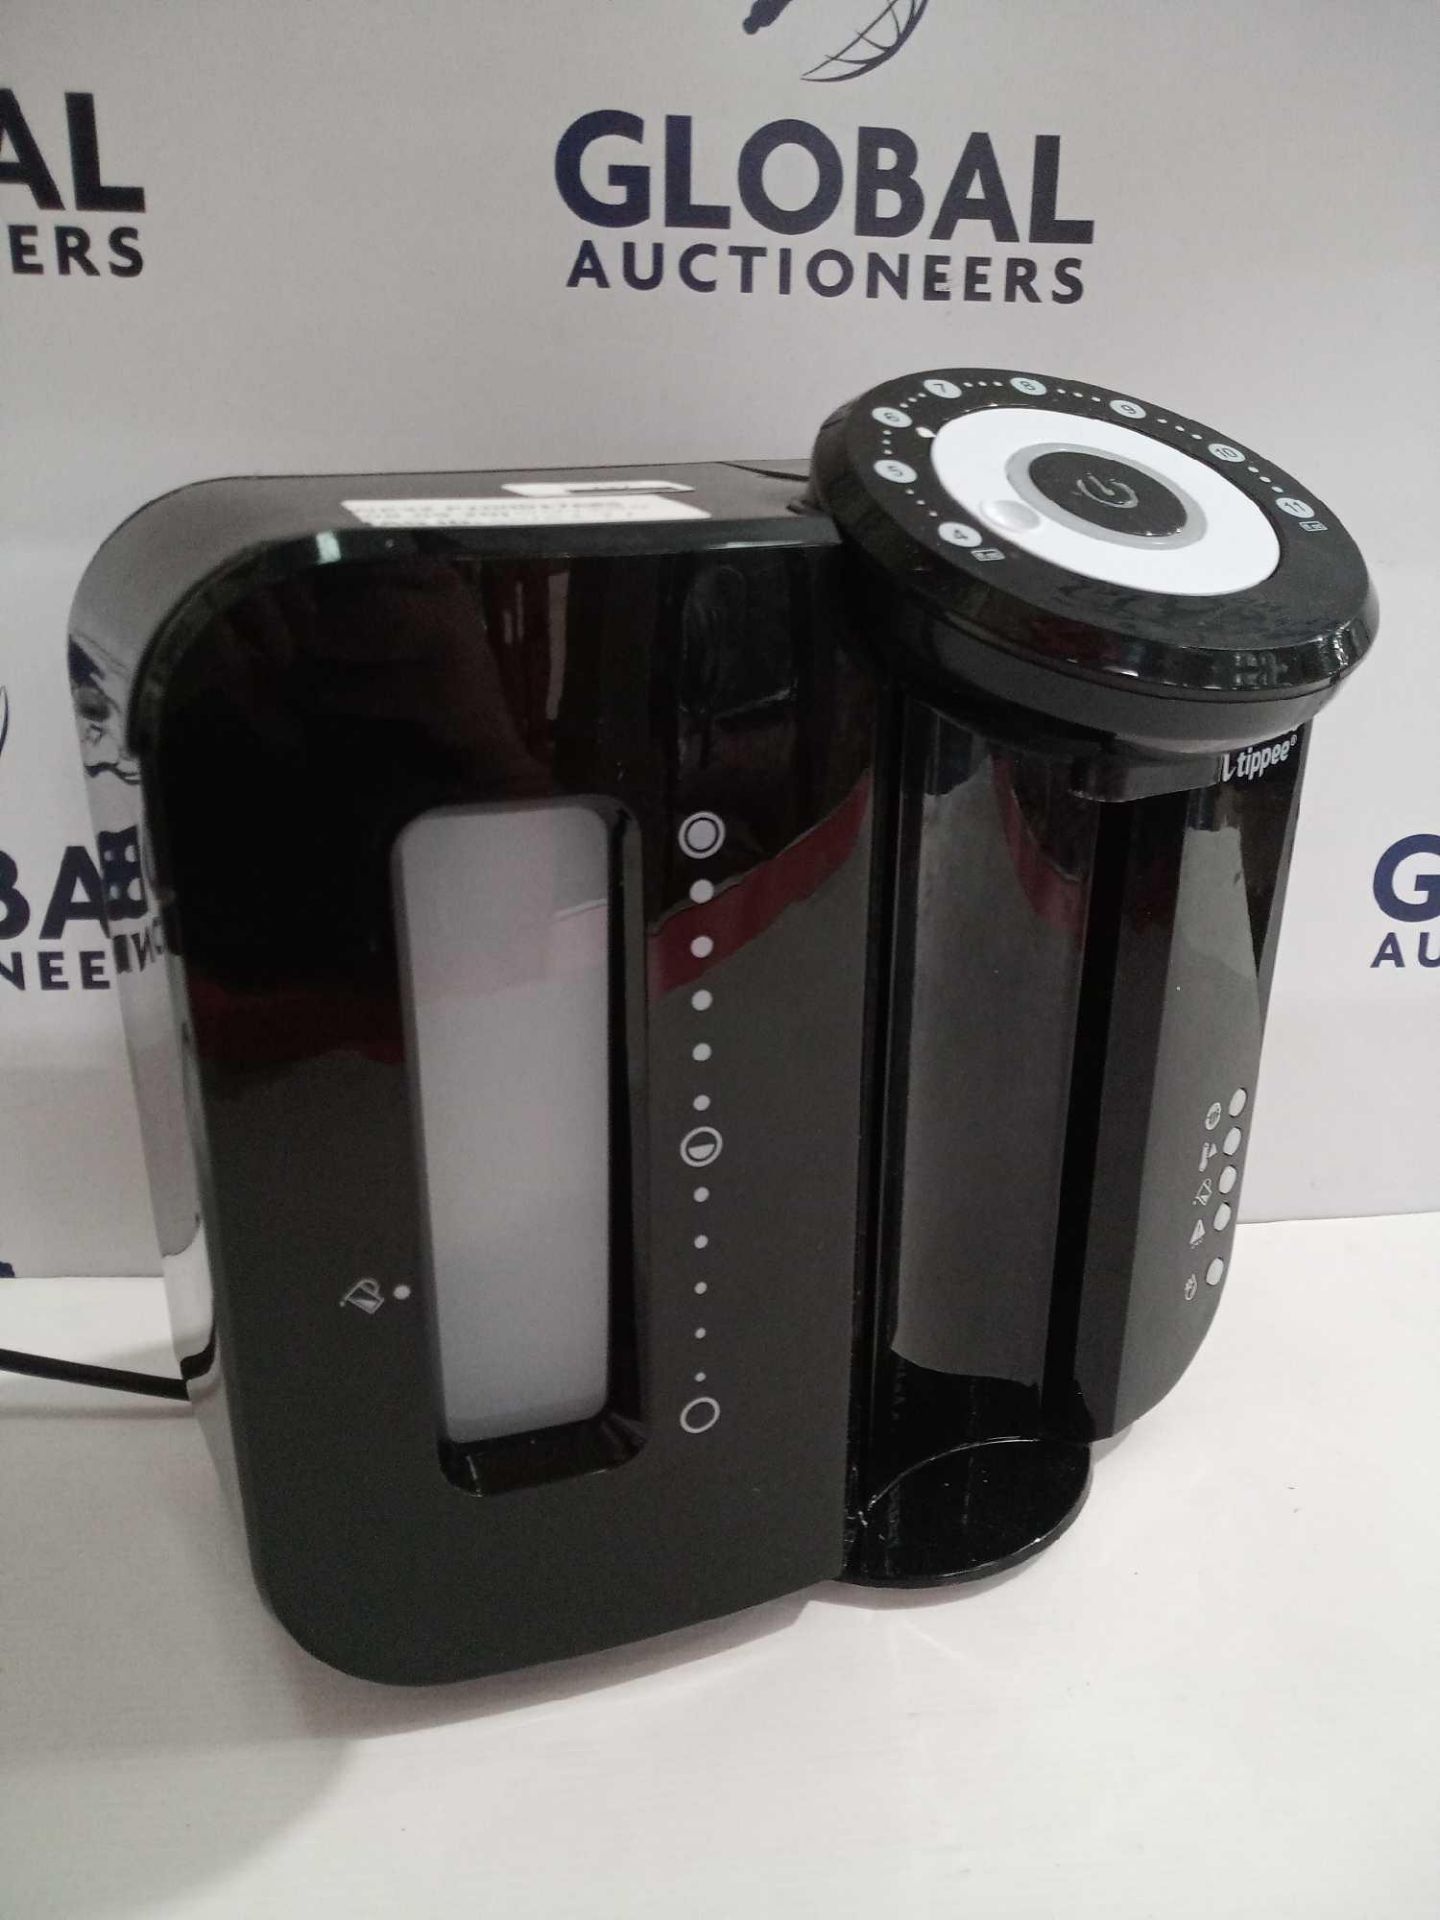 Rrp £75 Each Tommee Tippee Perfect Preparation Machines In Black - Image 2 of 4